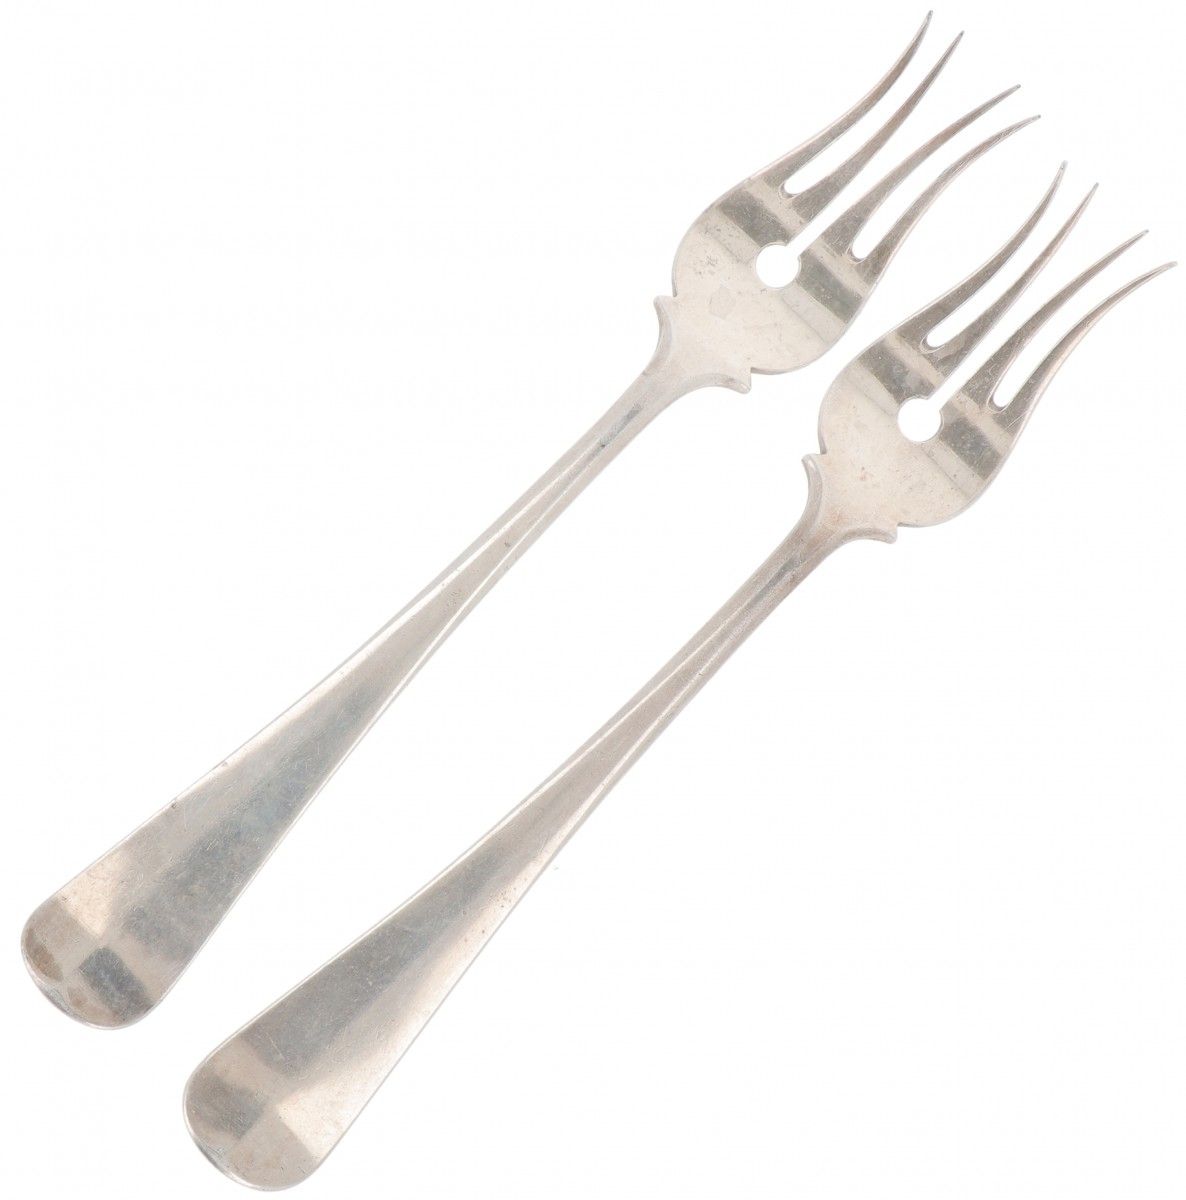 (2) piece set of cold meat forks "Haags Lofje" silver. "Haags Lofje"。荷兰，Zeist, G&hellip;